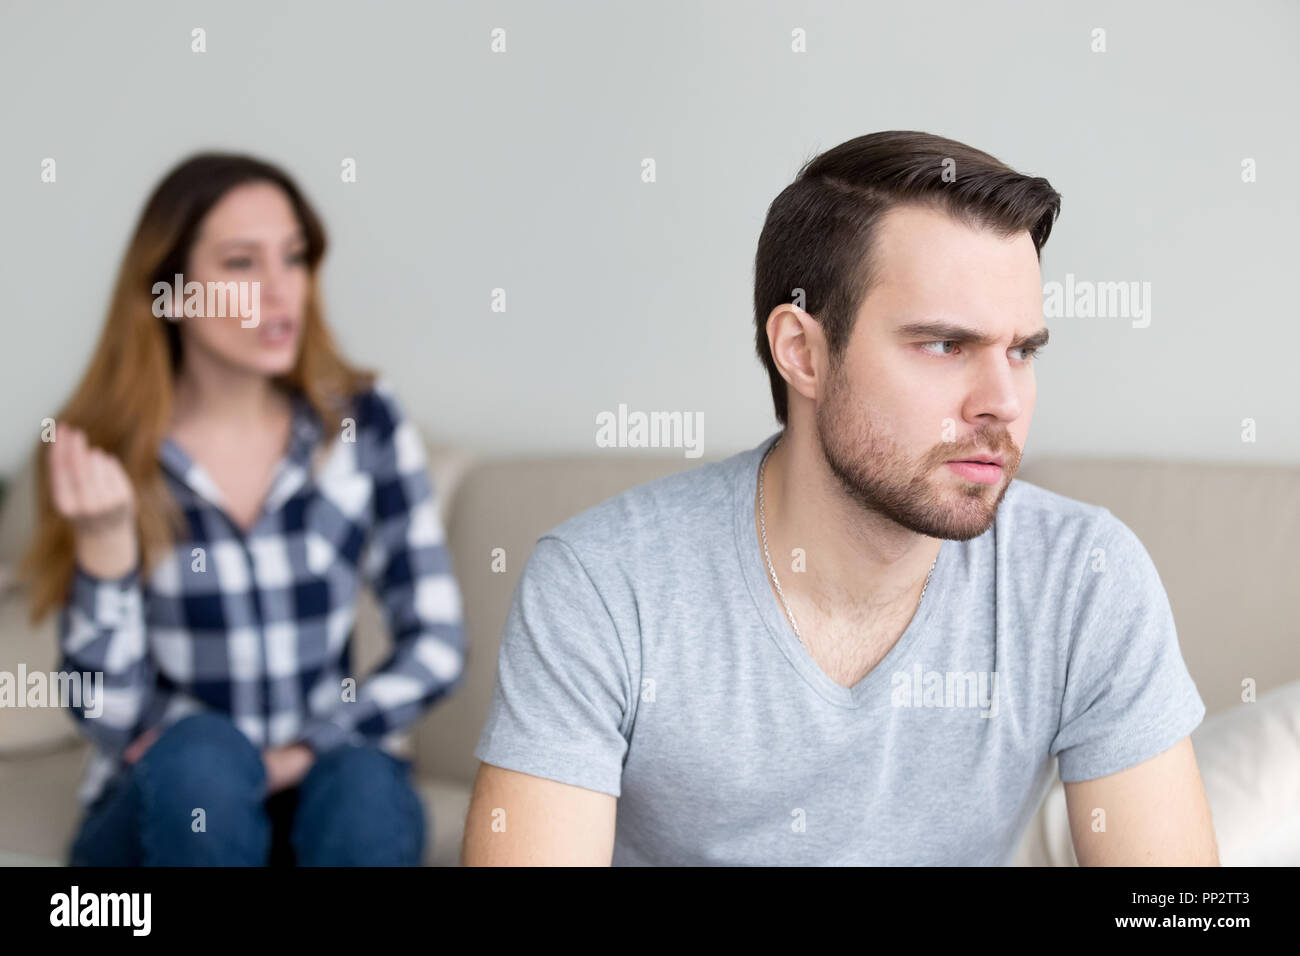 Annoyed husband tired of wife lecturing and arguing Stock Photo